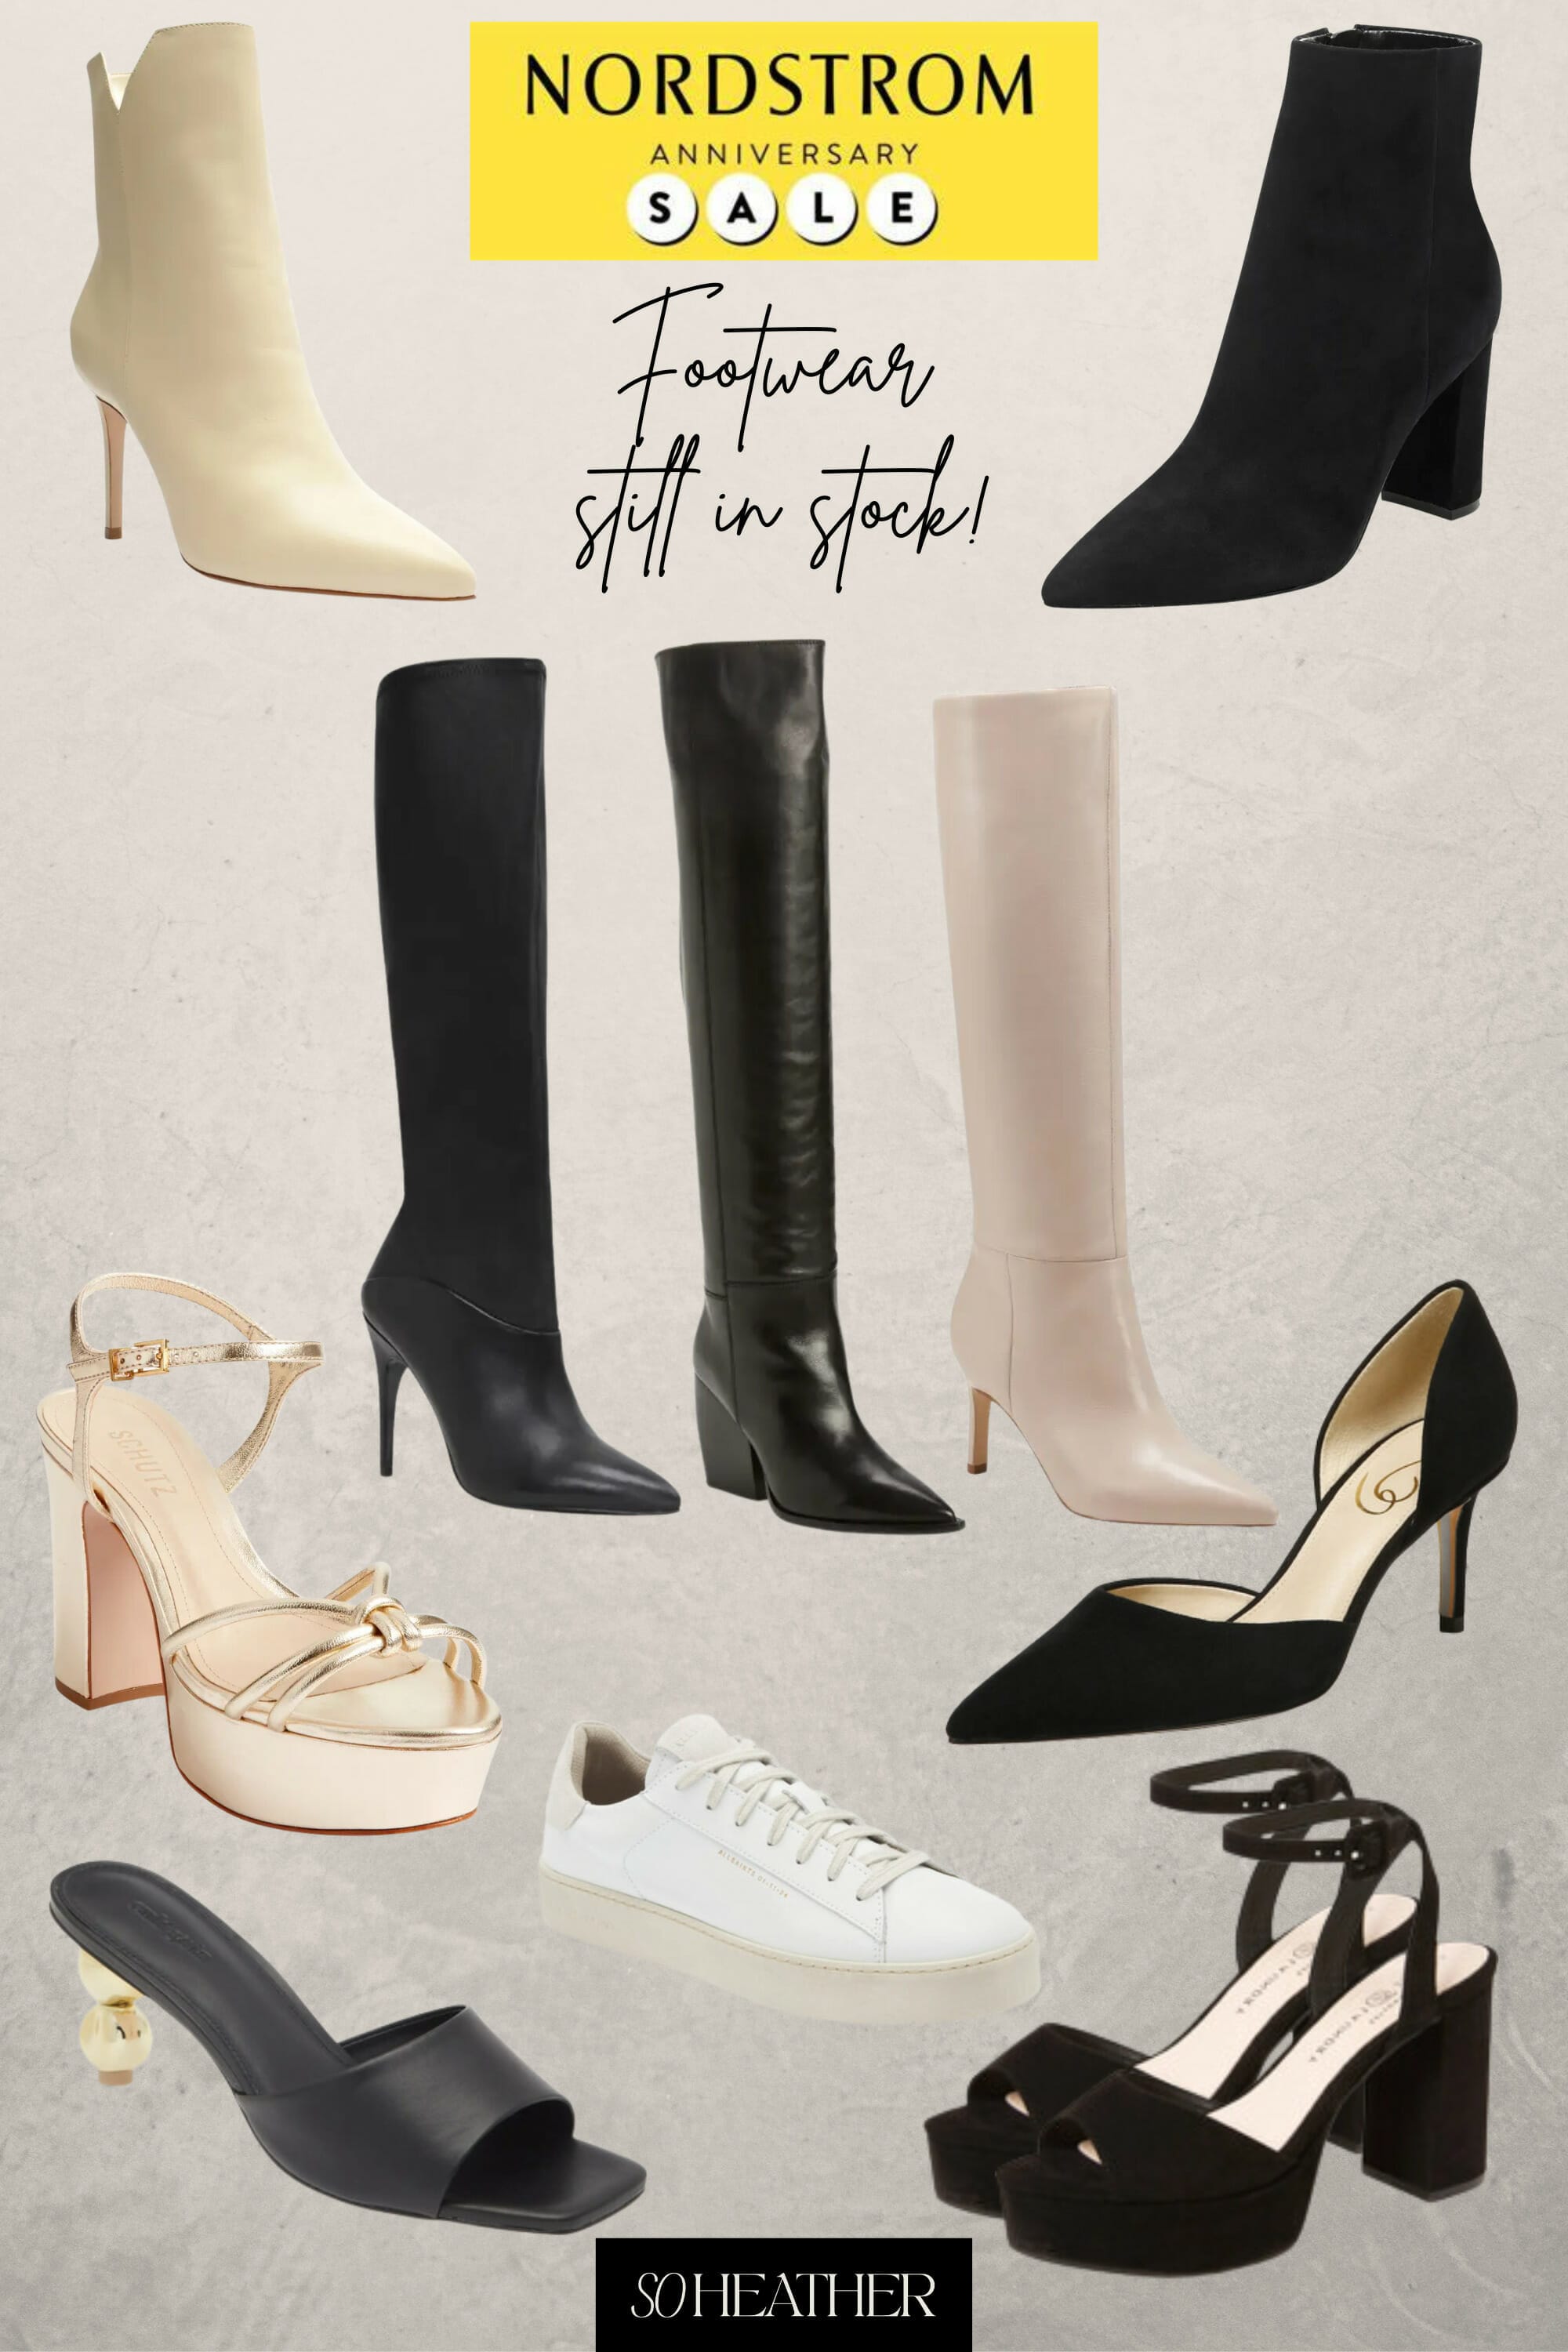 Flat lay collage with 10 pairs of the best shoes part of the Nordstrom Anniversary sale.